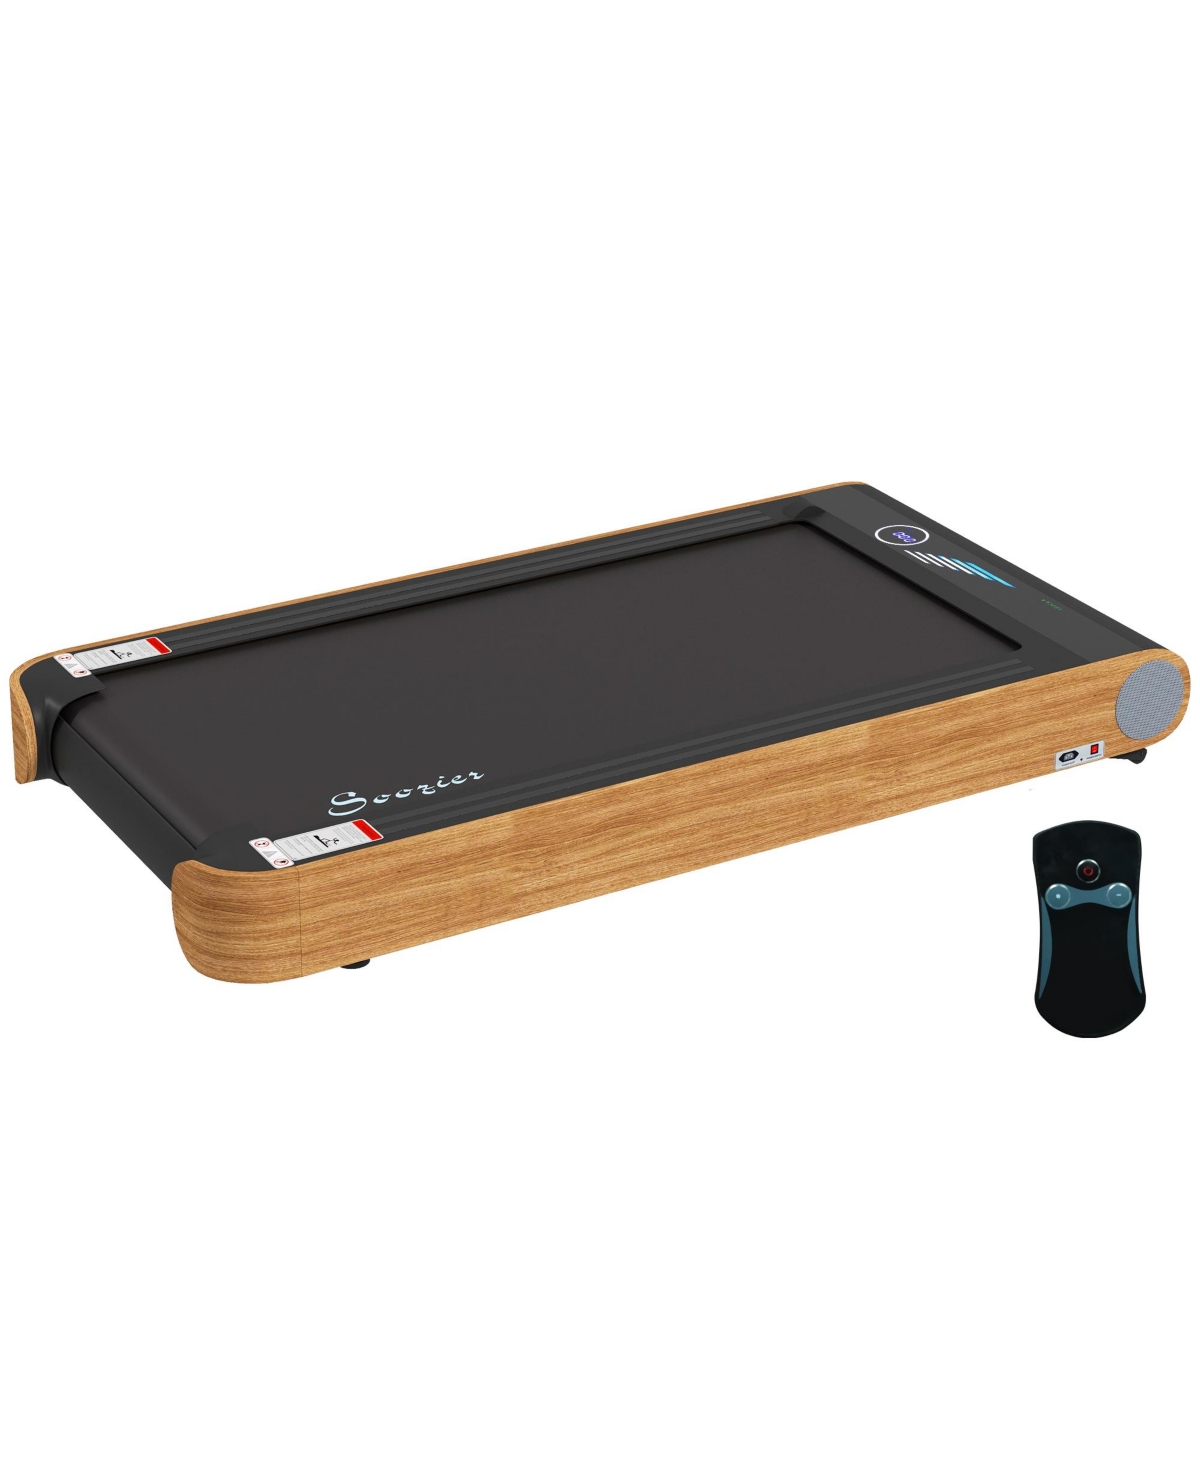 Under Desk Treadmill Walking Pad with Bluetooth Speaker, Wood Look - Natural and black